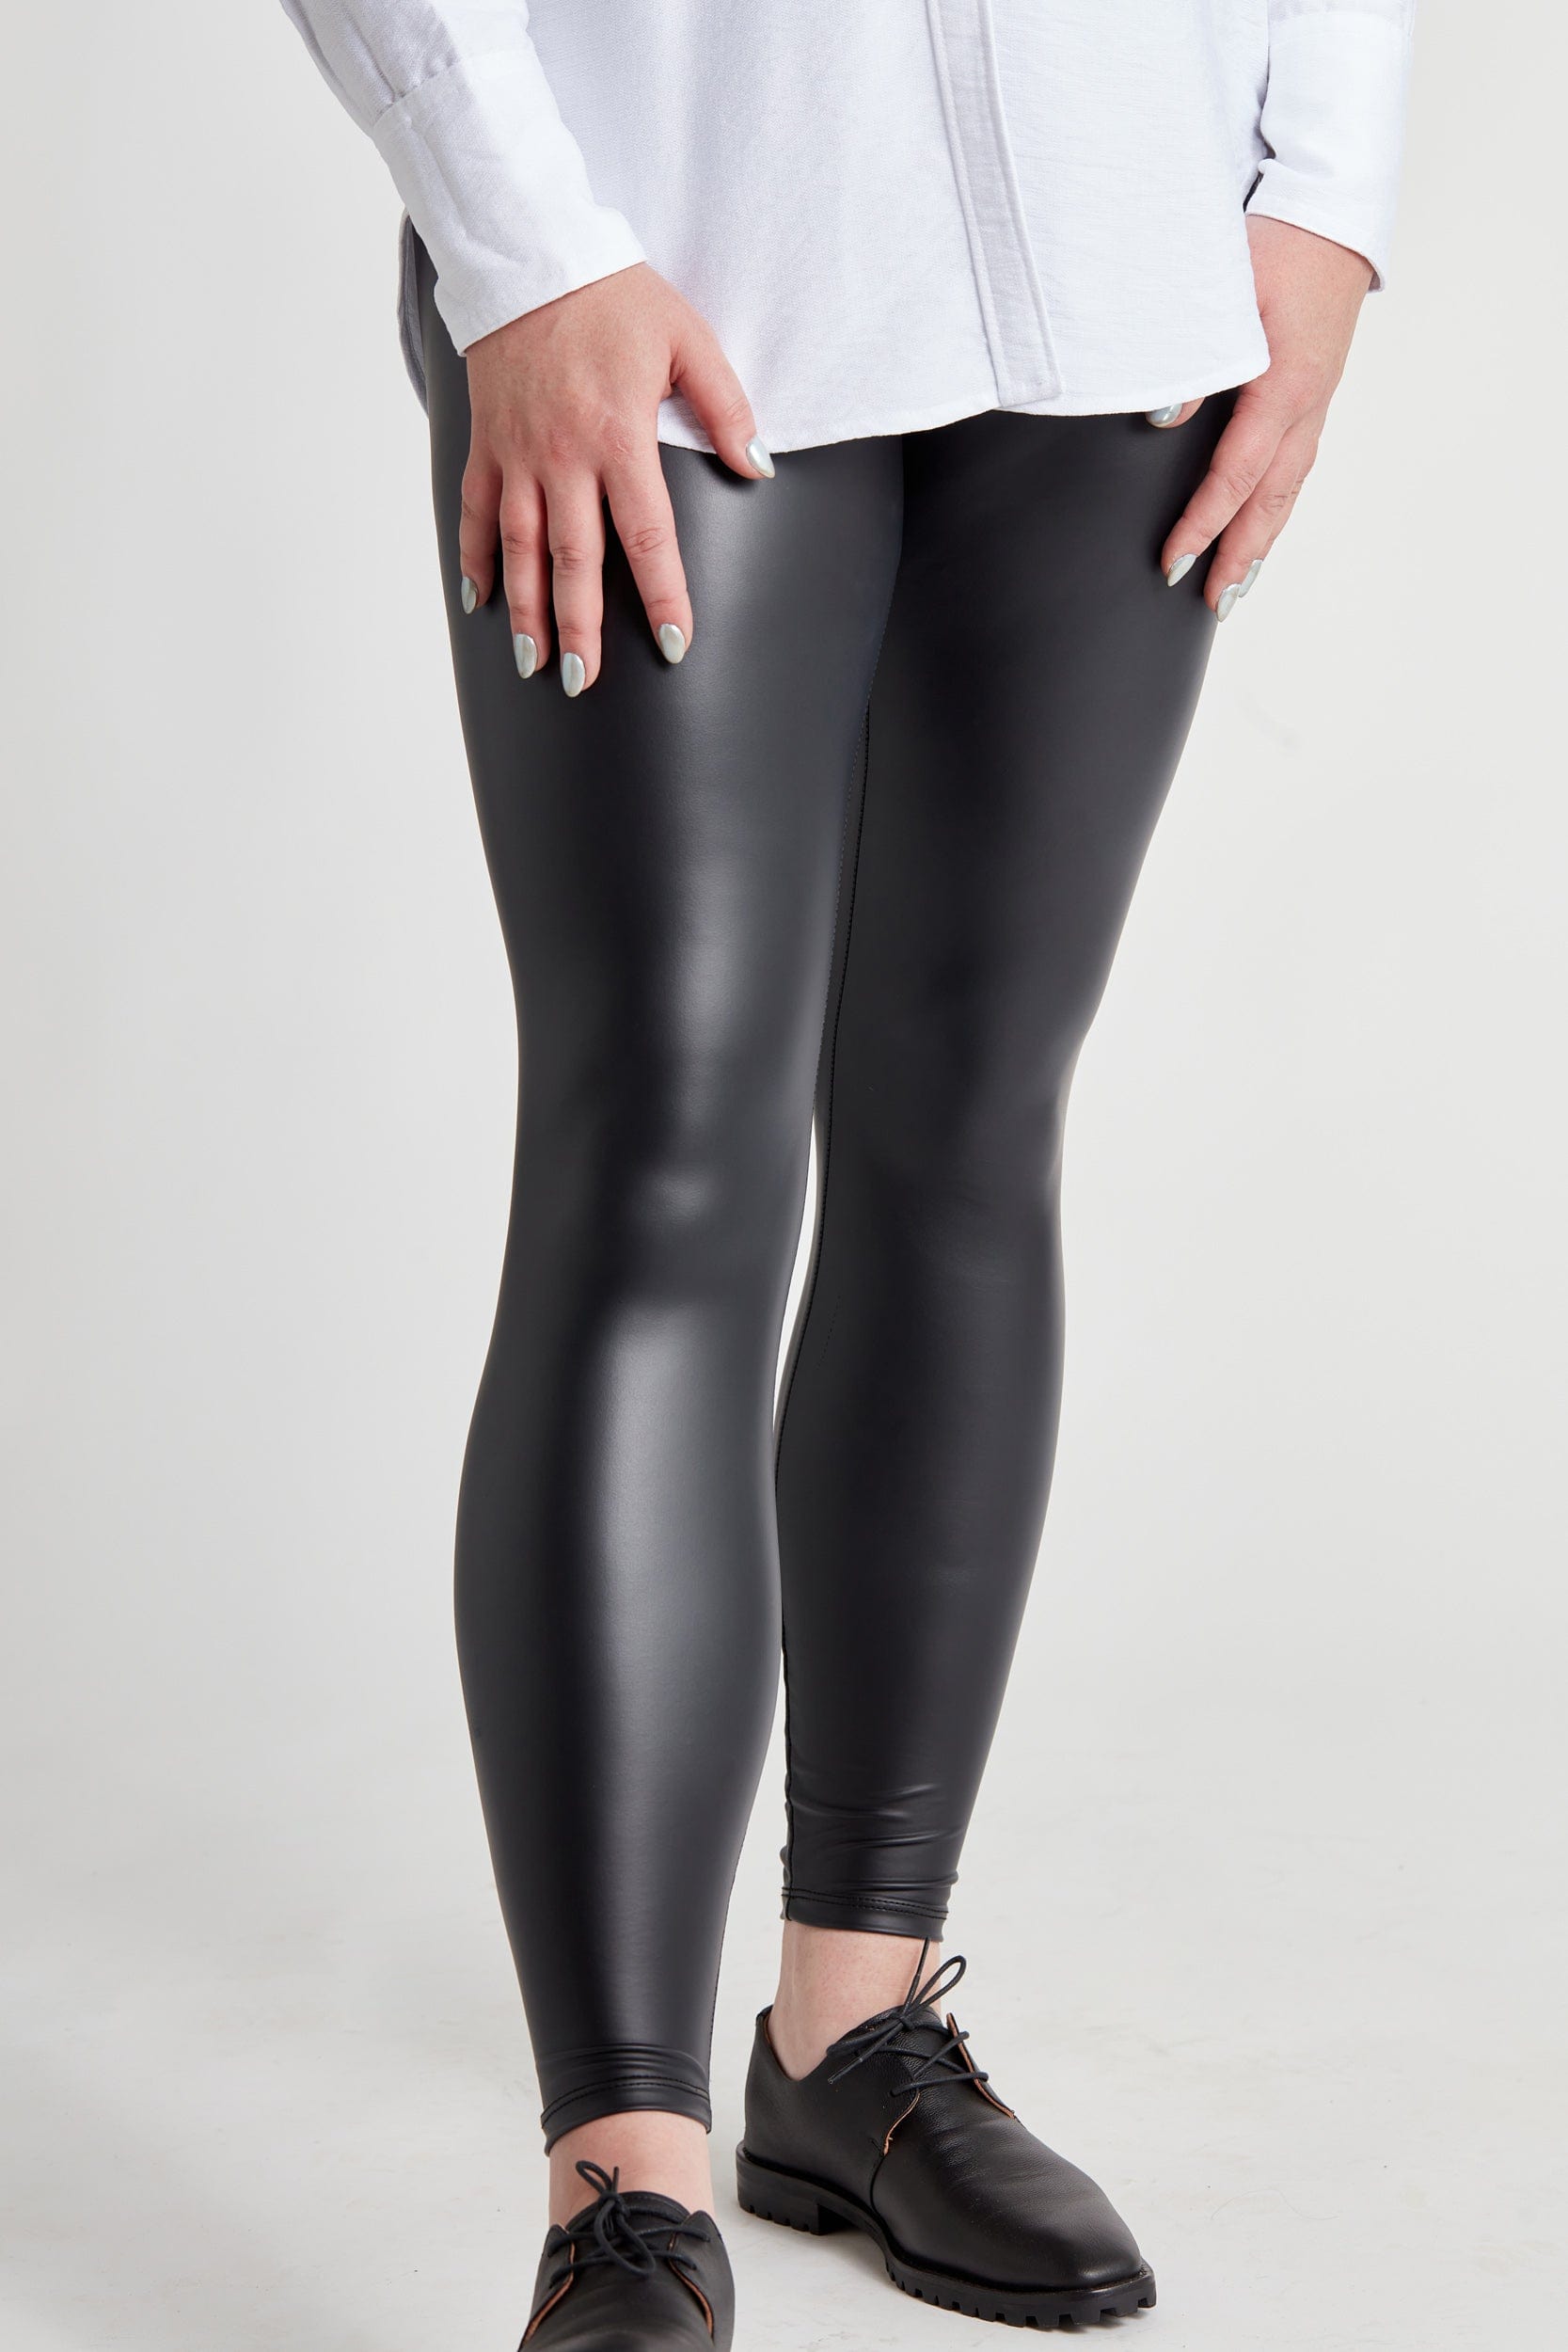 Spanx Faux Suede Leggings- OIive***FINAL SALE*** – Hand In Pocket